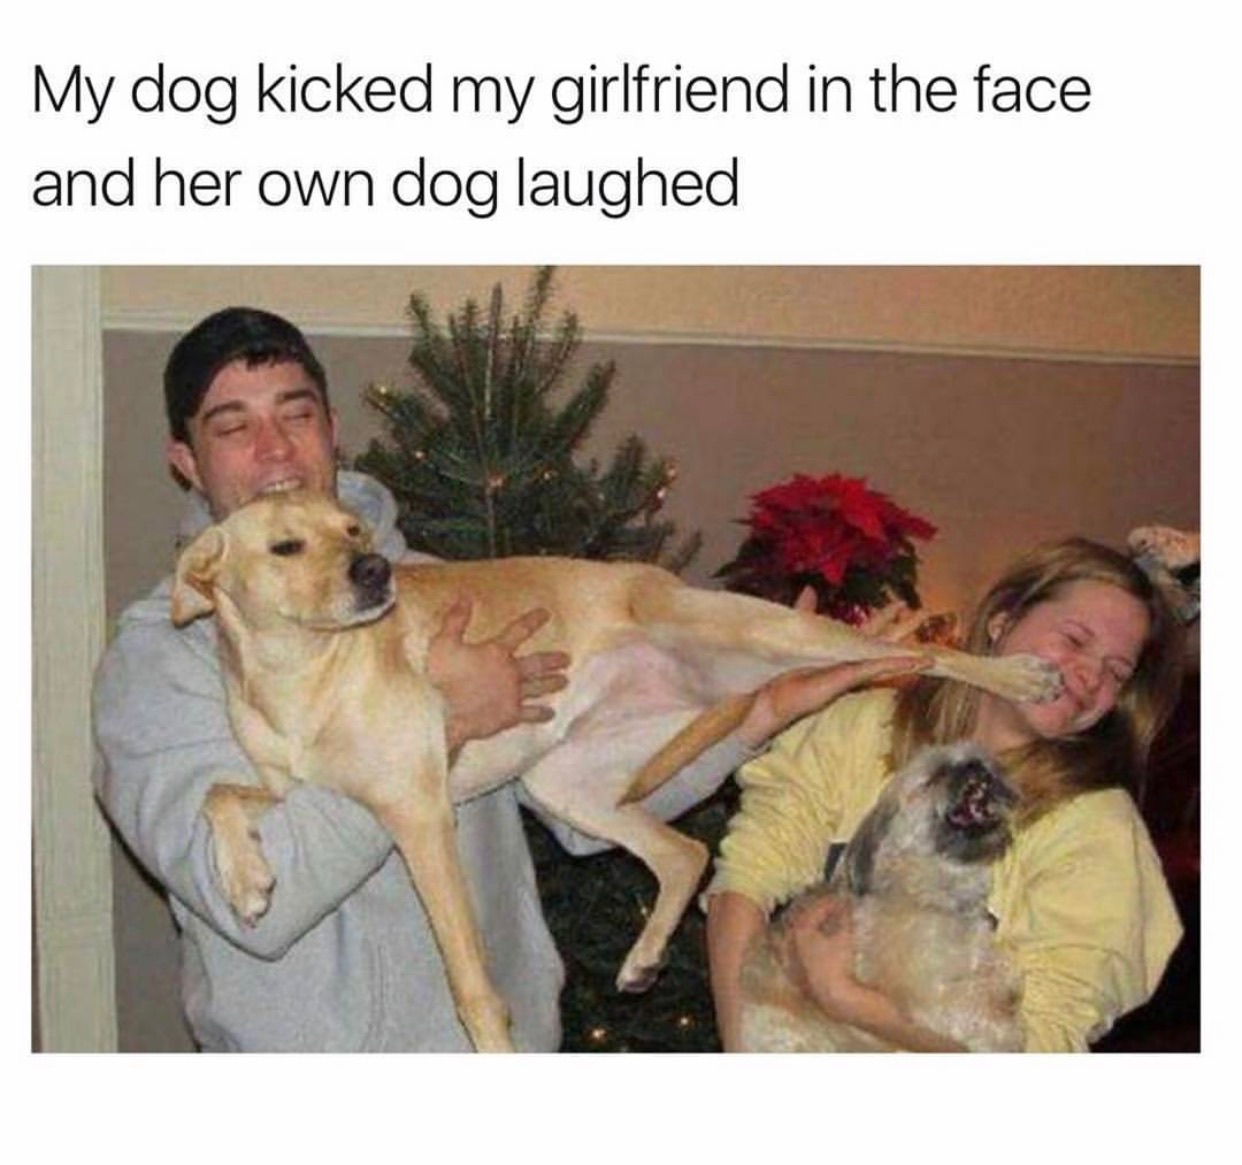 memes - dog jealous of girlfriend - My dog kicked my girlfriend in the face and her own dog laughed